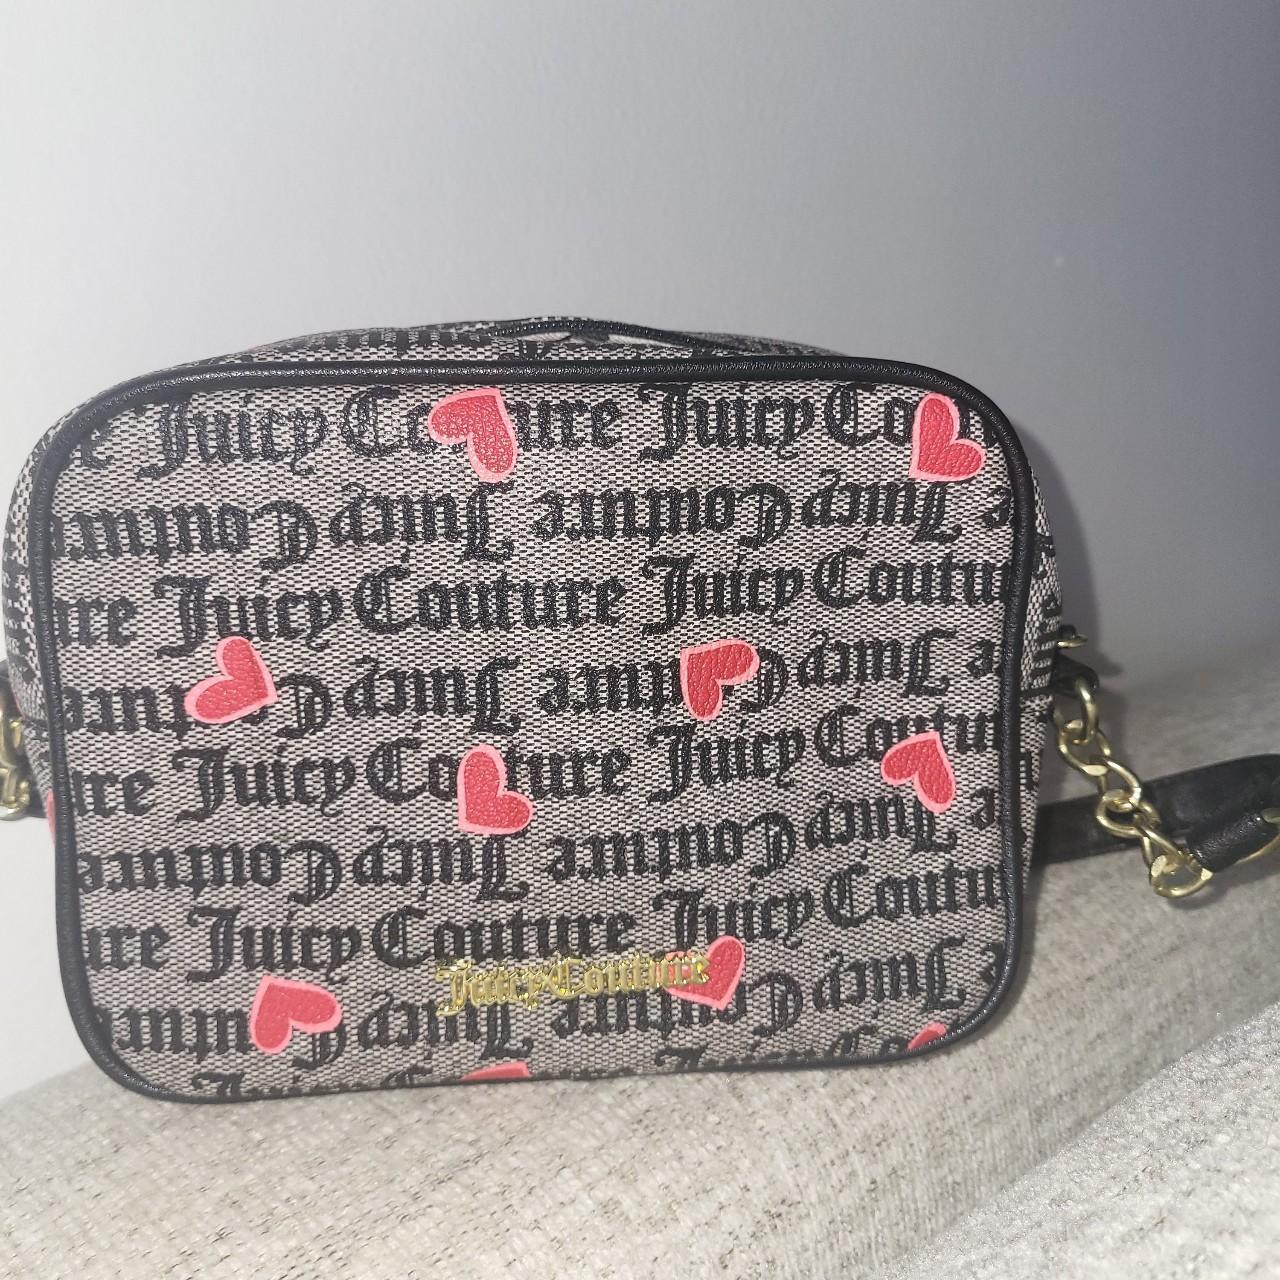 Juicy Couture Kimberly Small Shoulder Bag In Black | ModeSens